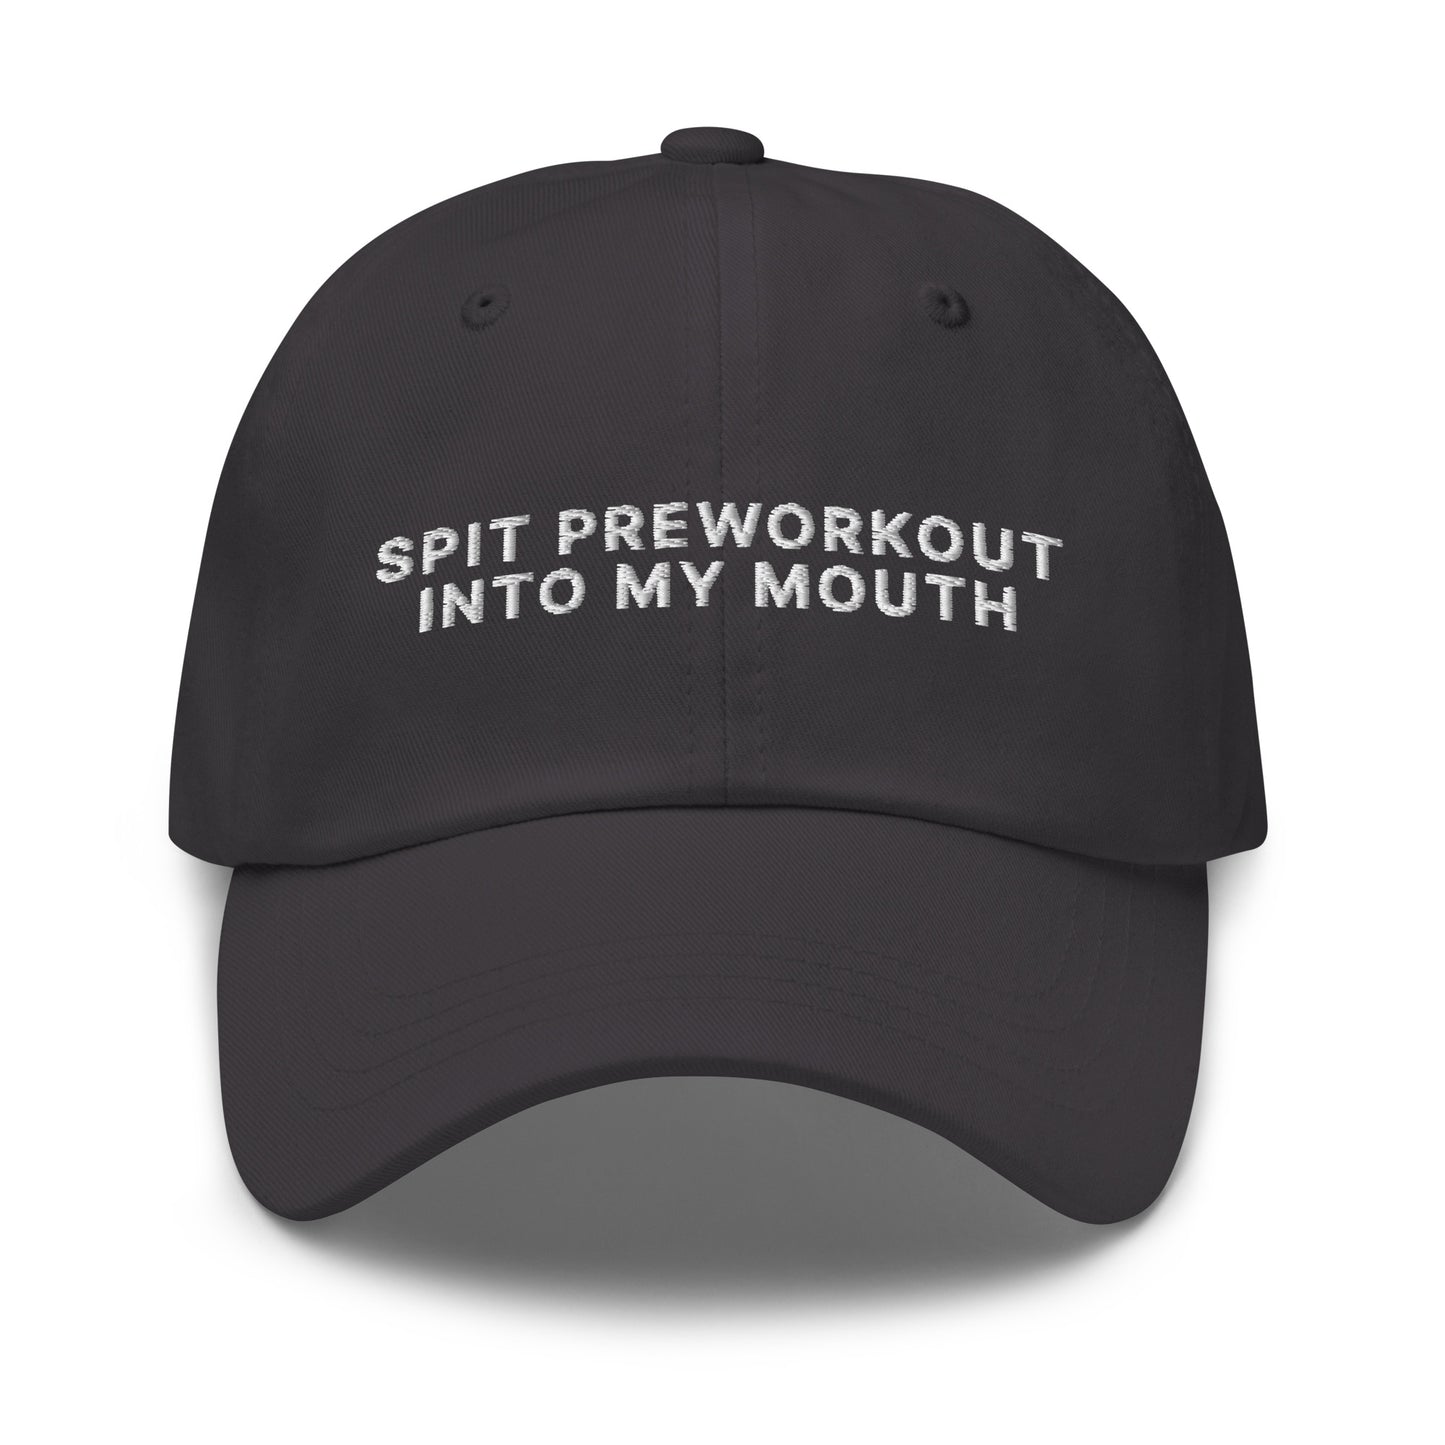 Spit Pre Workout Into My Mouth hat